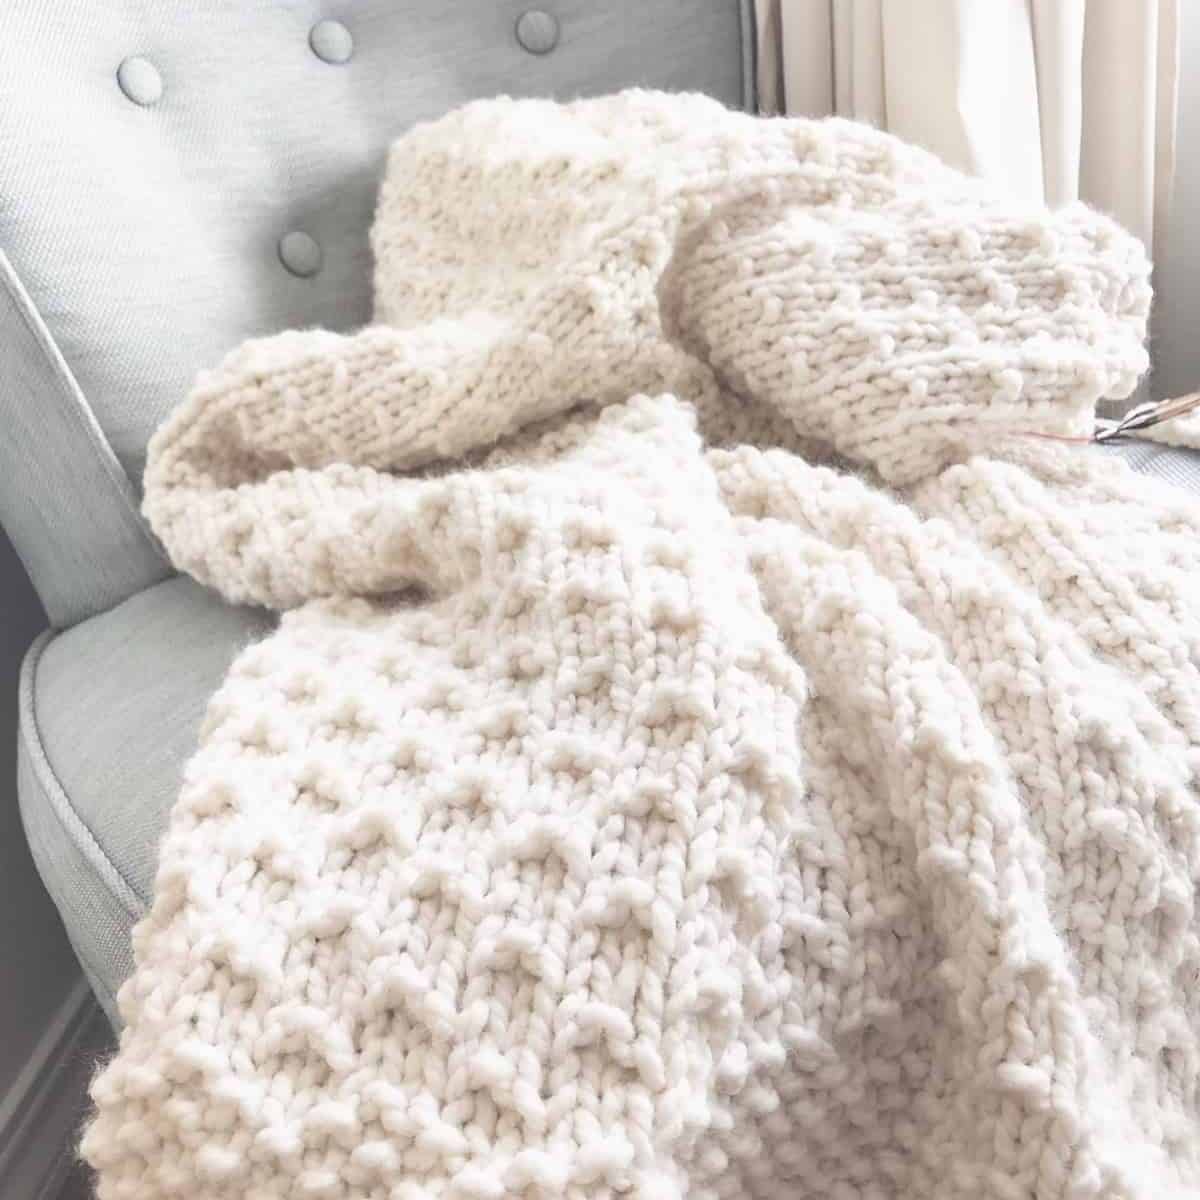 Chunky knit blanket in cream with dot texture on vintage blue chair.